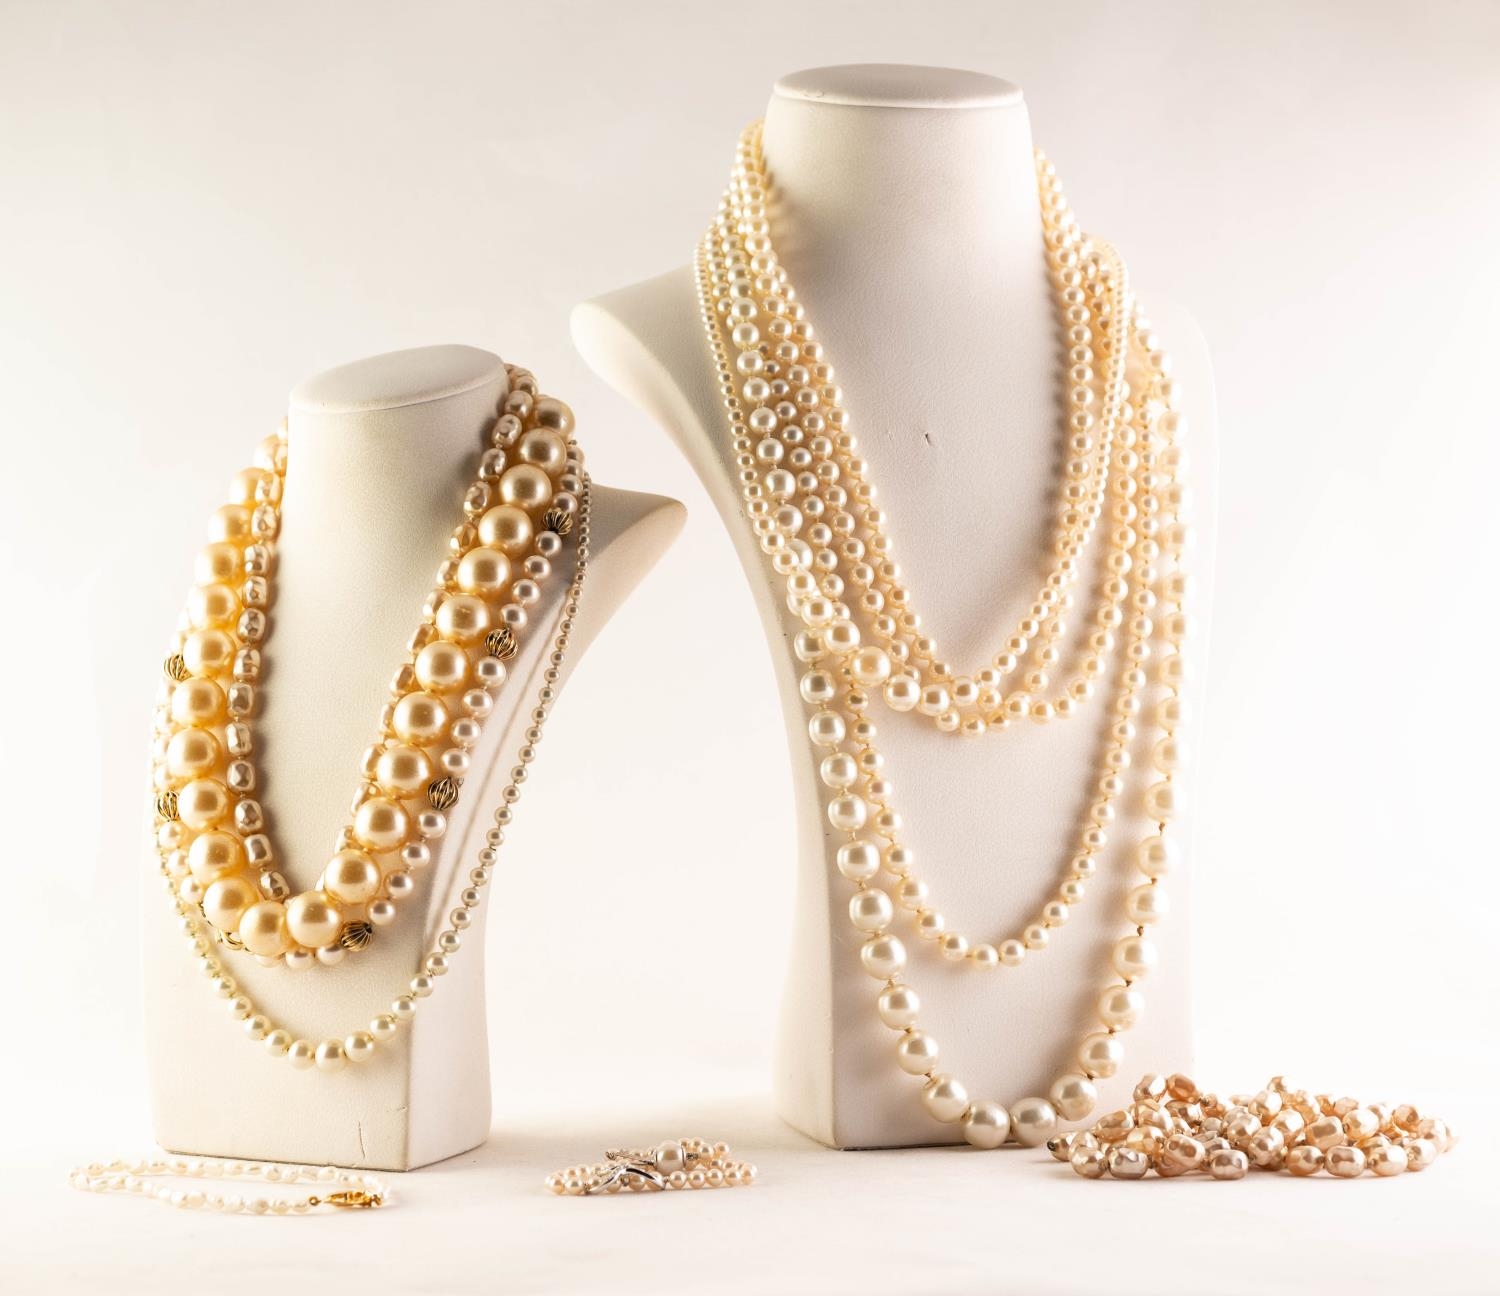 ELEVEN VARTIOUS SINGLE STRAND CULTURED, SIMULATED AND FRESHWATER PEARL NECKLACES AND BRACELETS, with